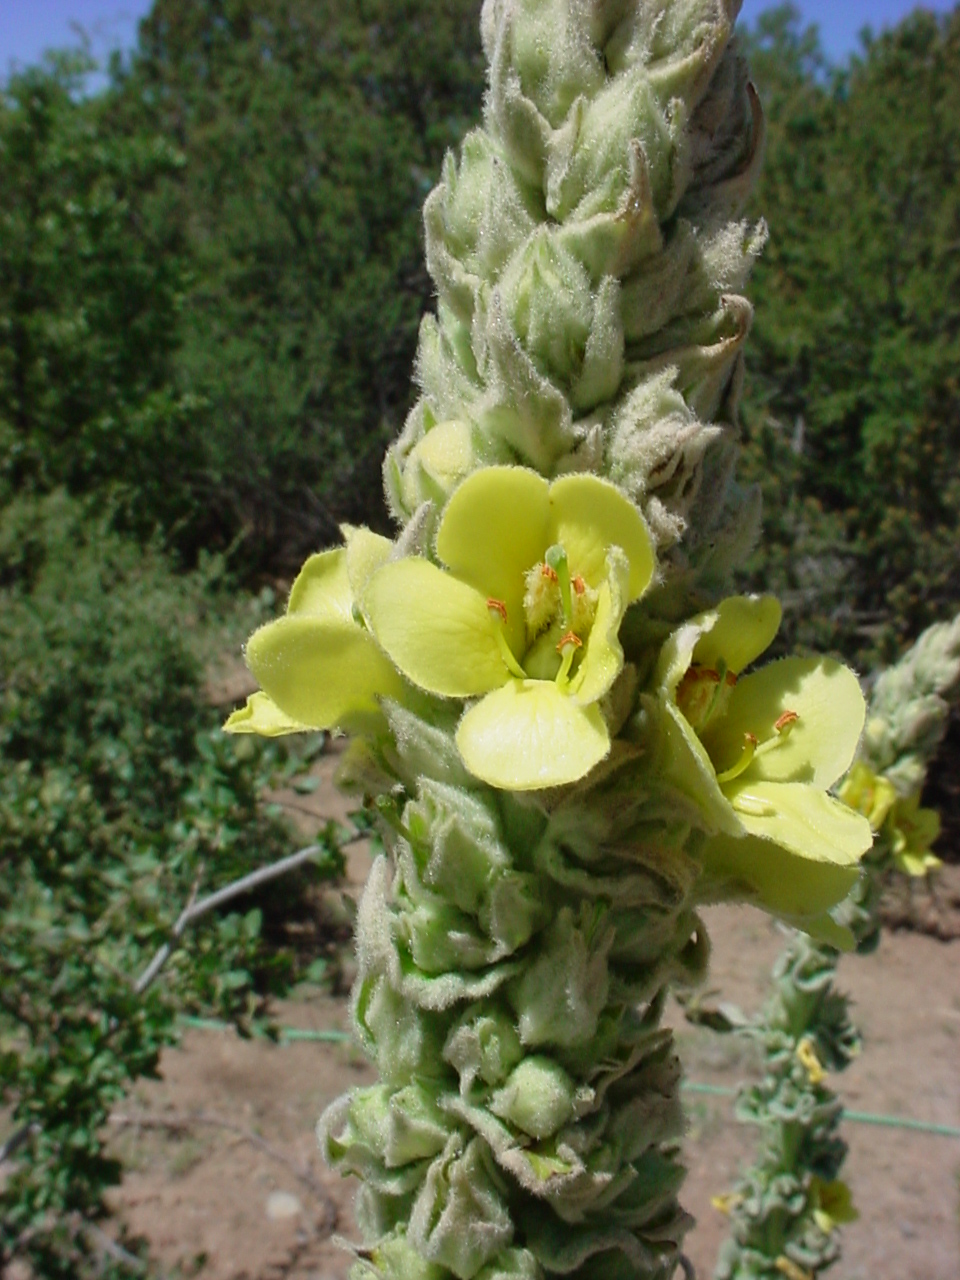 Arrangement of the small yellow flowers on the inflorescence